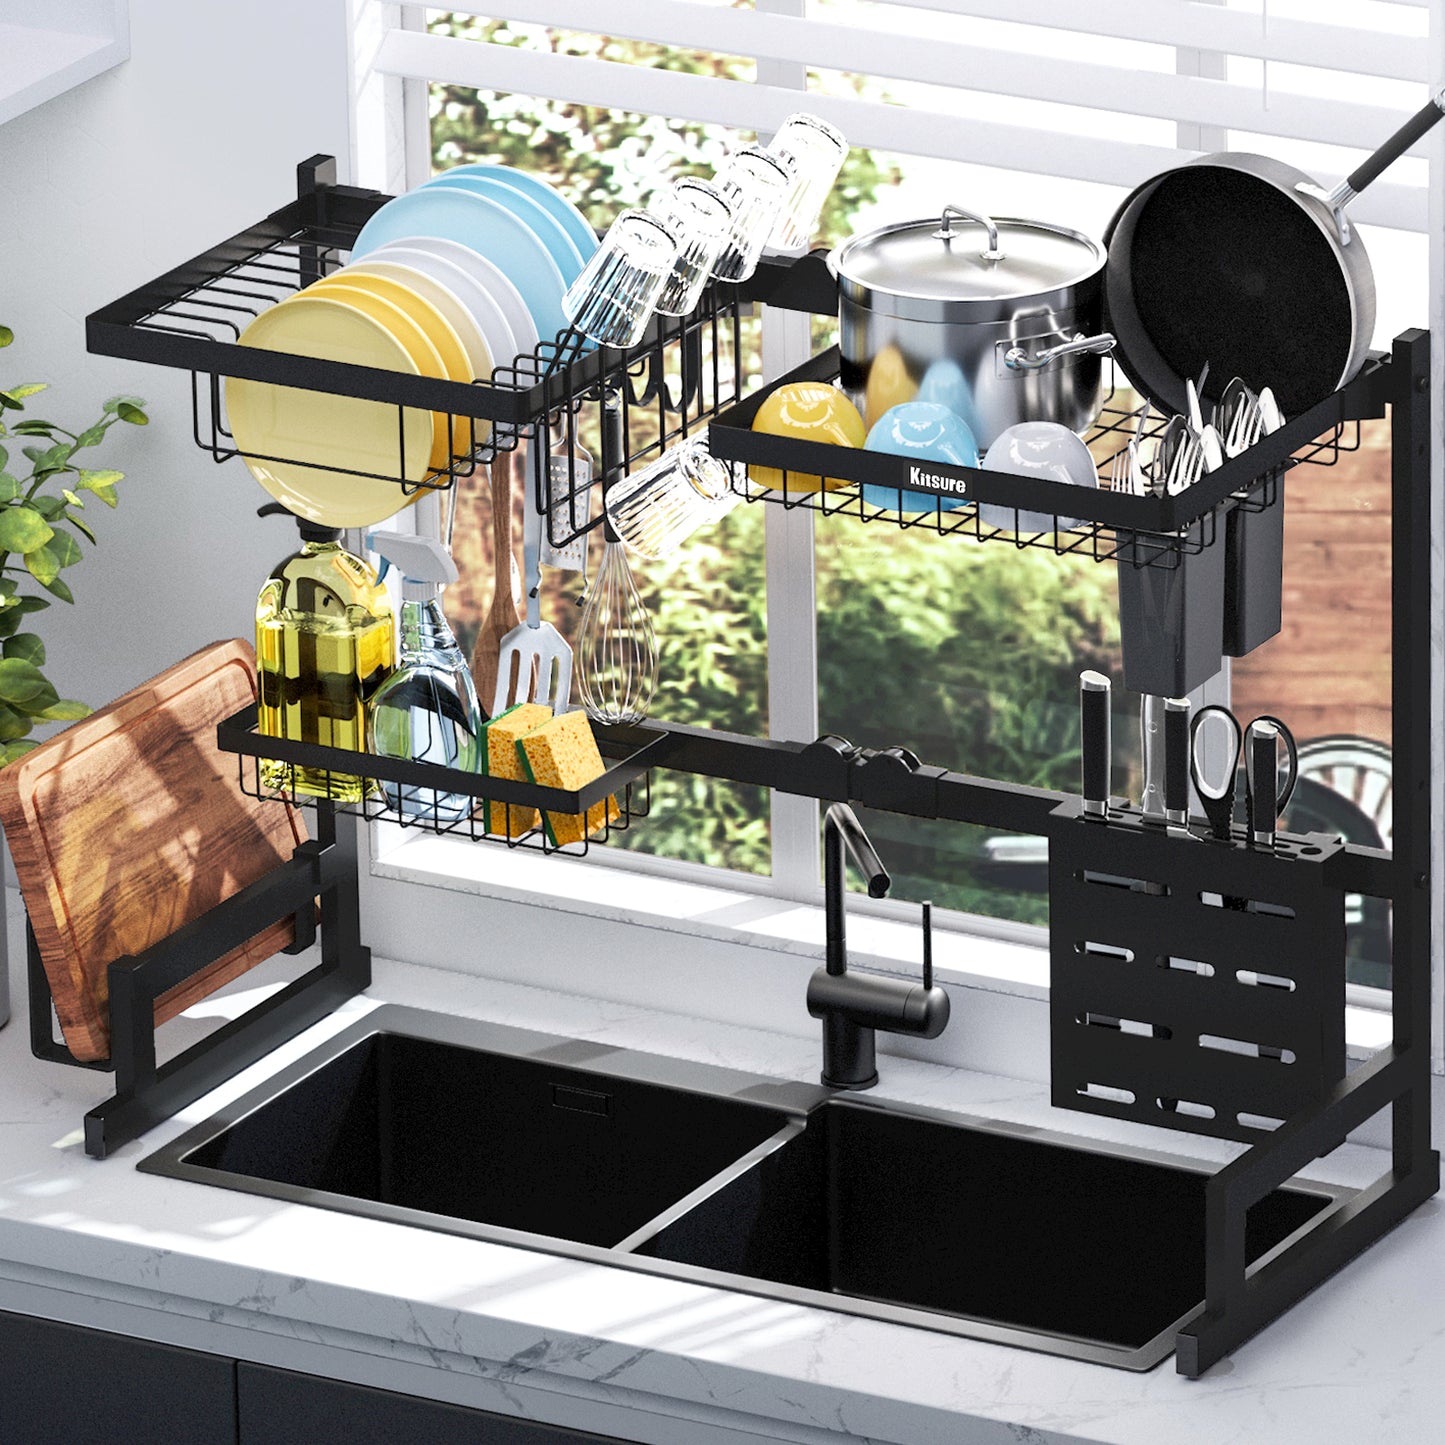 ] #ad Kitsure Over-The-Sink Dish Drying Rack 2-Tier with Adjustable  Length Design (33.4-39.4in),Multifunctional Dish Rack for Over-Sink Use,  Stainless Steel , Space-Saving, with 42% off, for $34.99 : r/DealsRUs